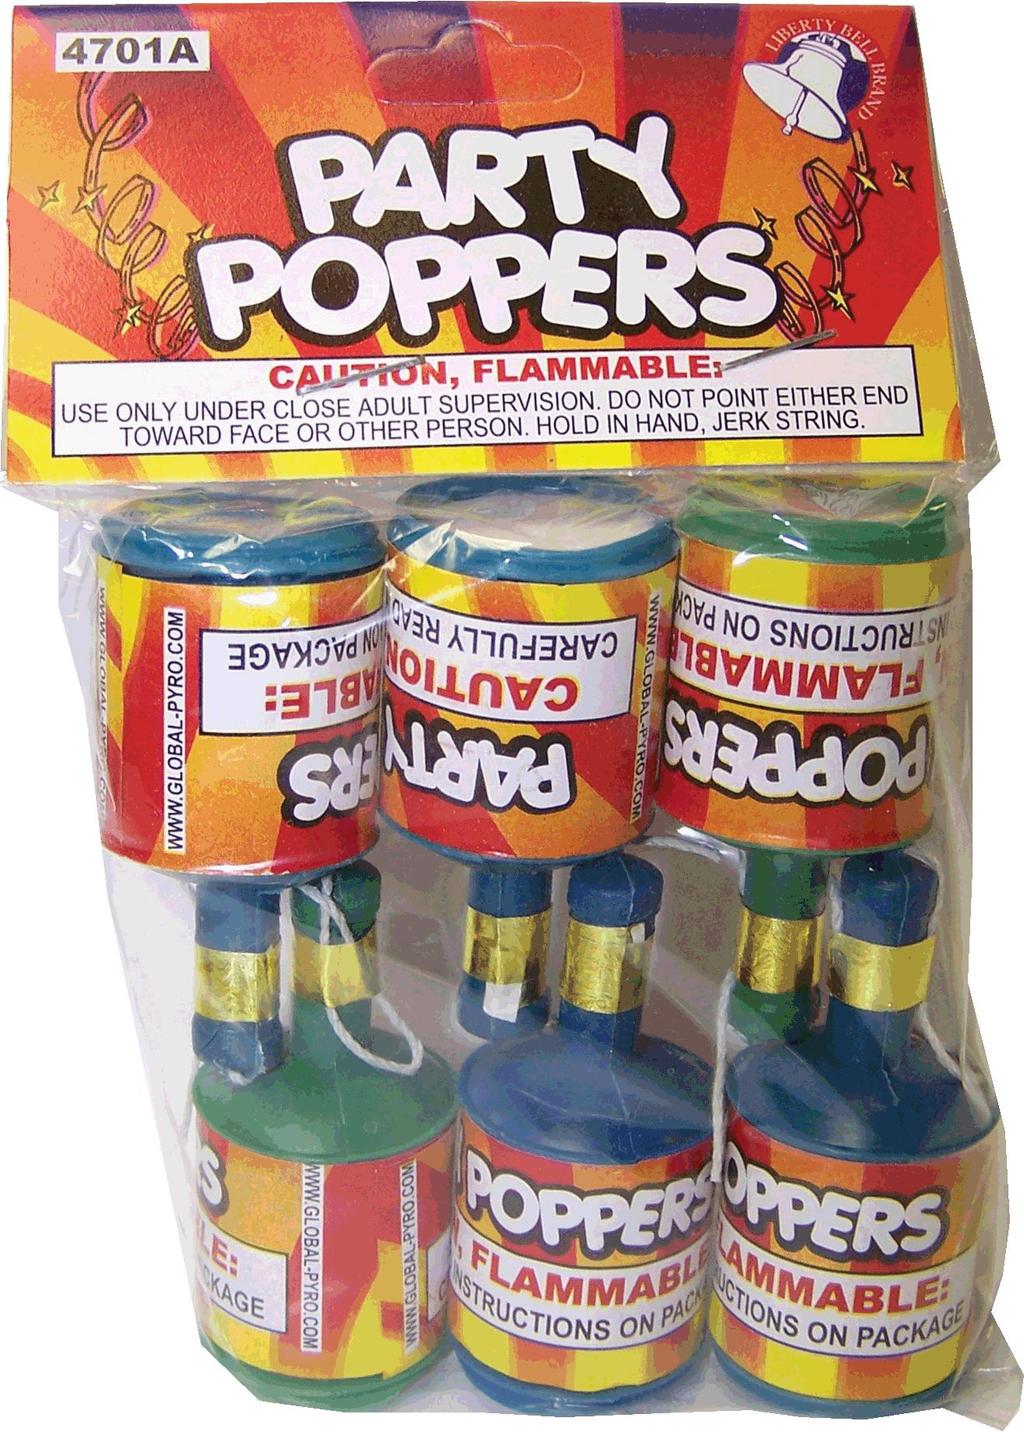 What are NOT Consumer Fireworks Novelties deregulated by US DOT except when